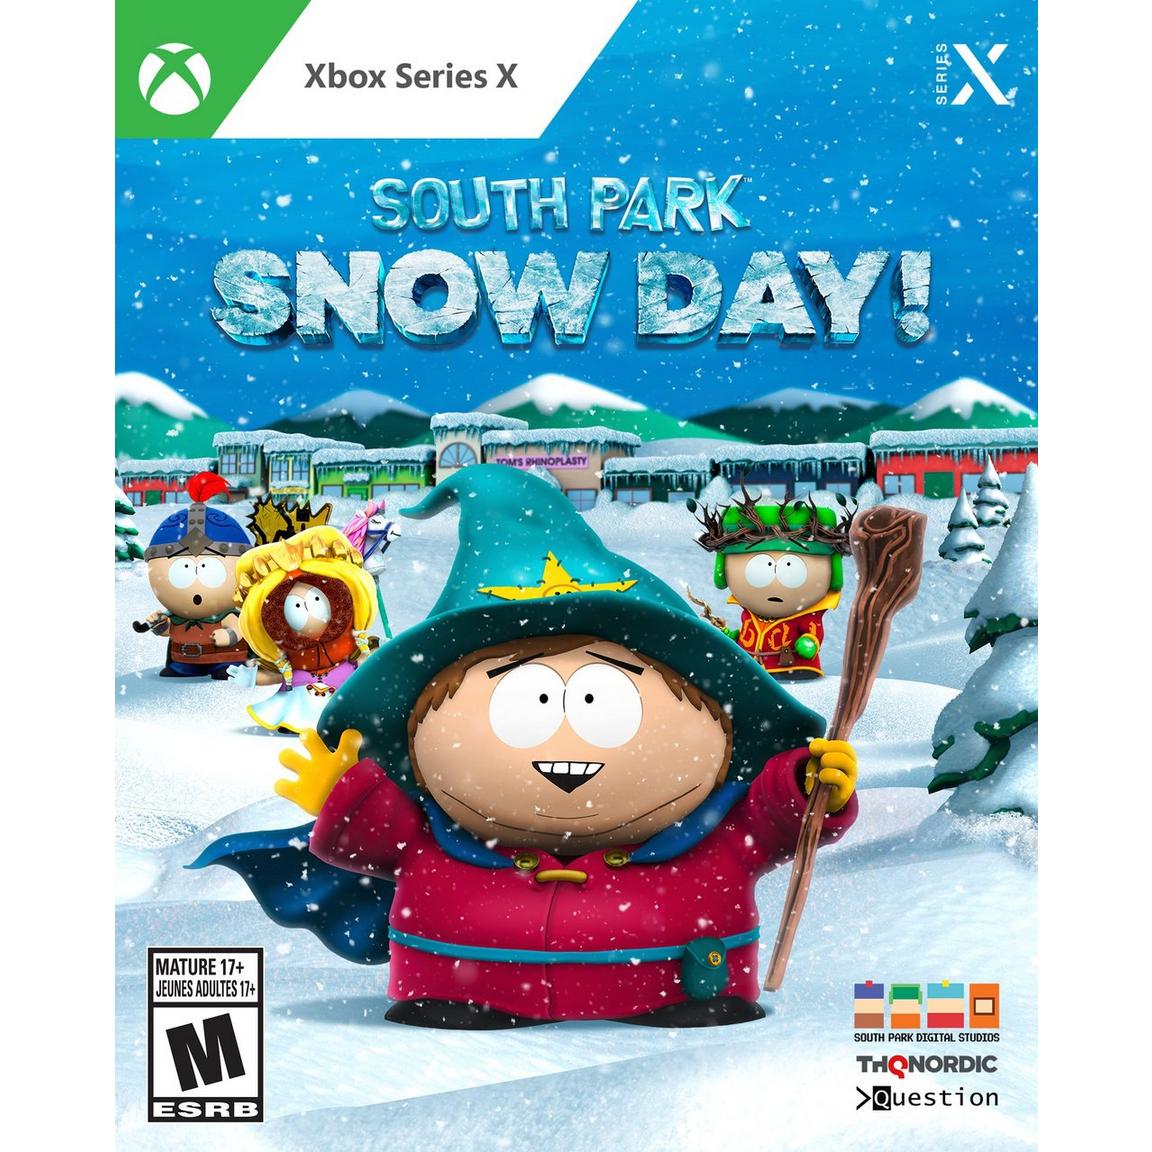 Видеоигра SOUTH PARK: SNOW DAY!- Xbox Series X south park the fractured but whole дополнение от заката до каса бонита